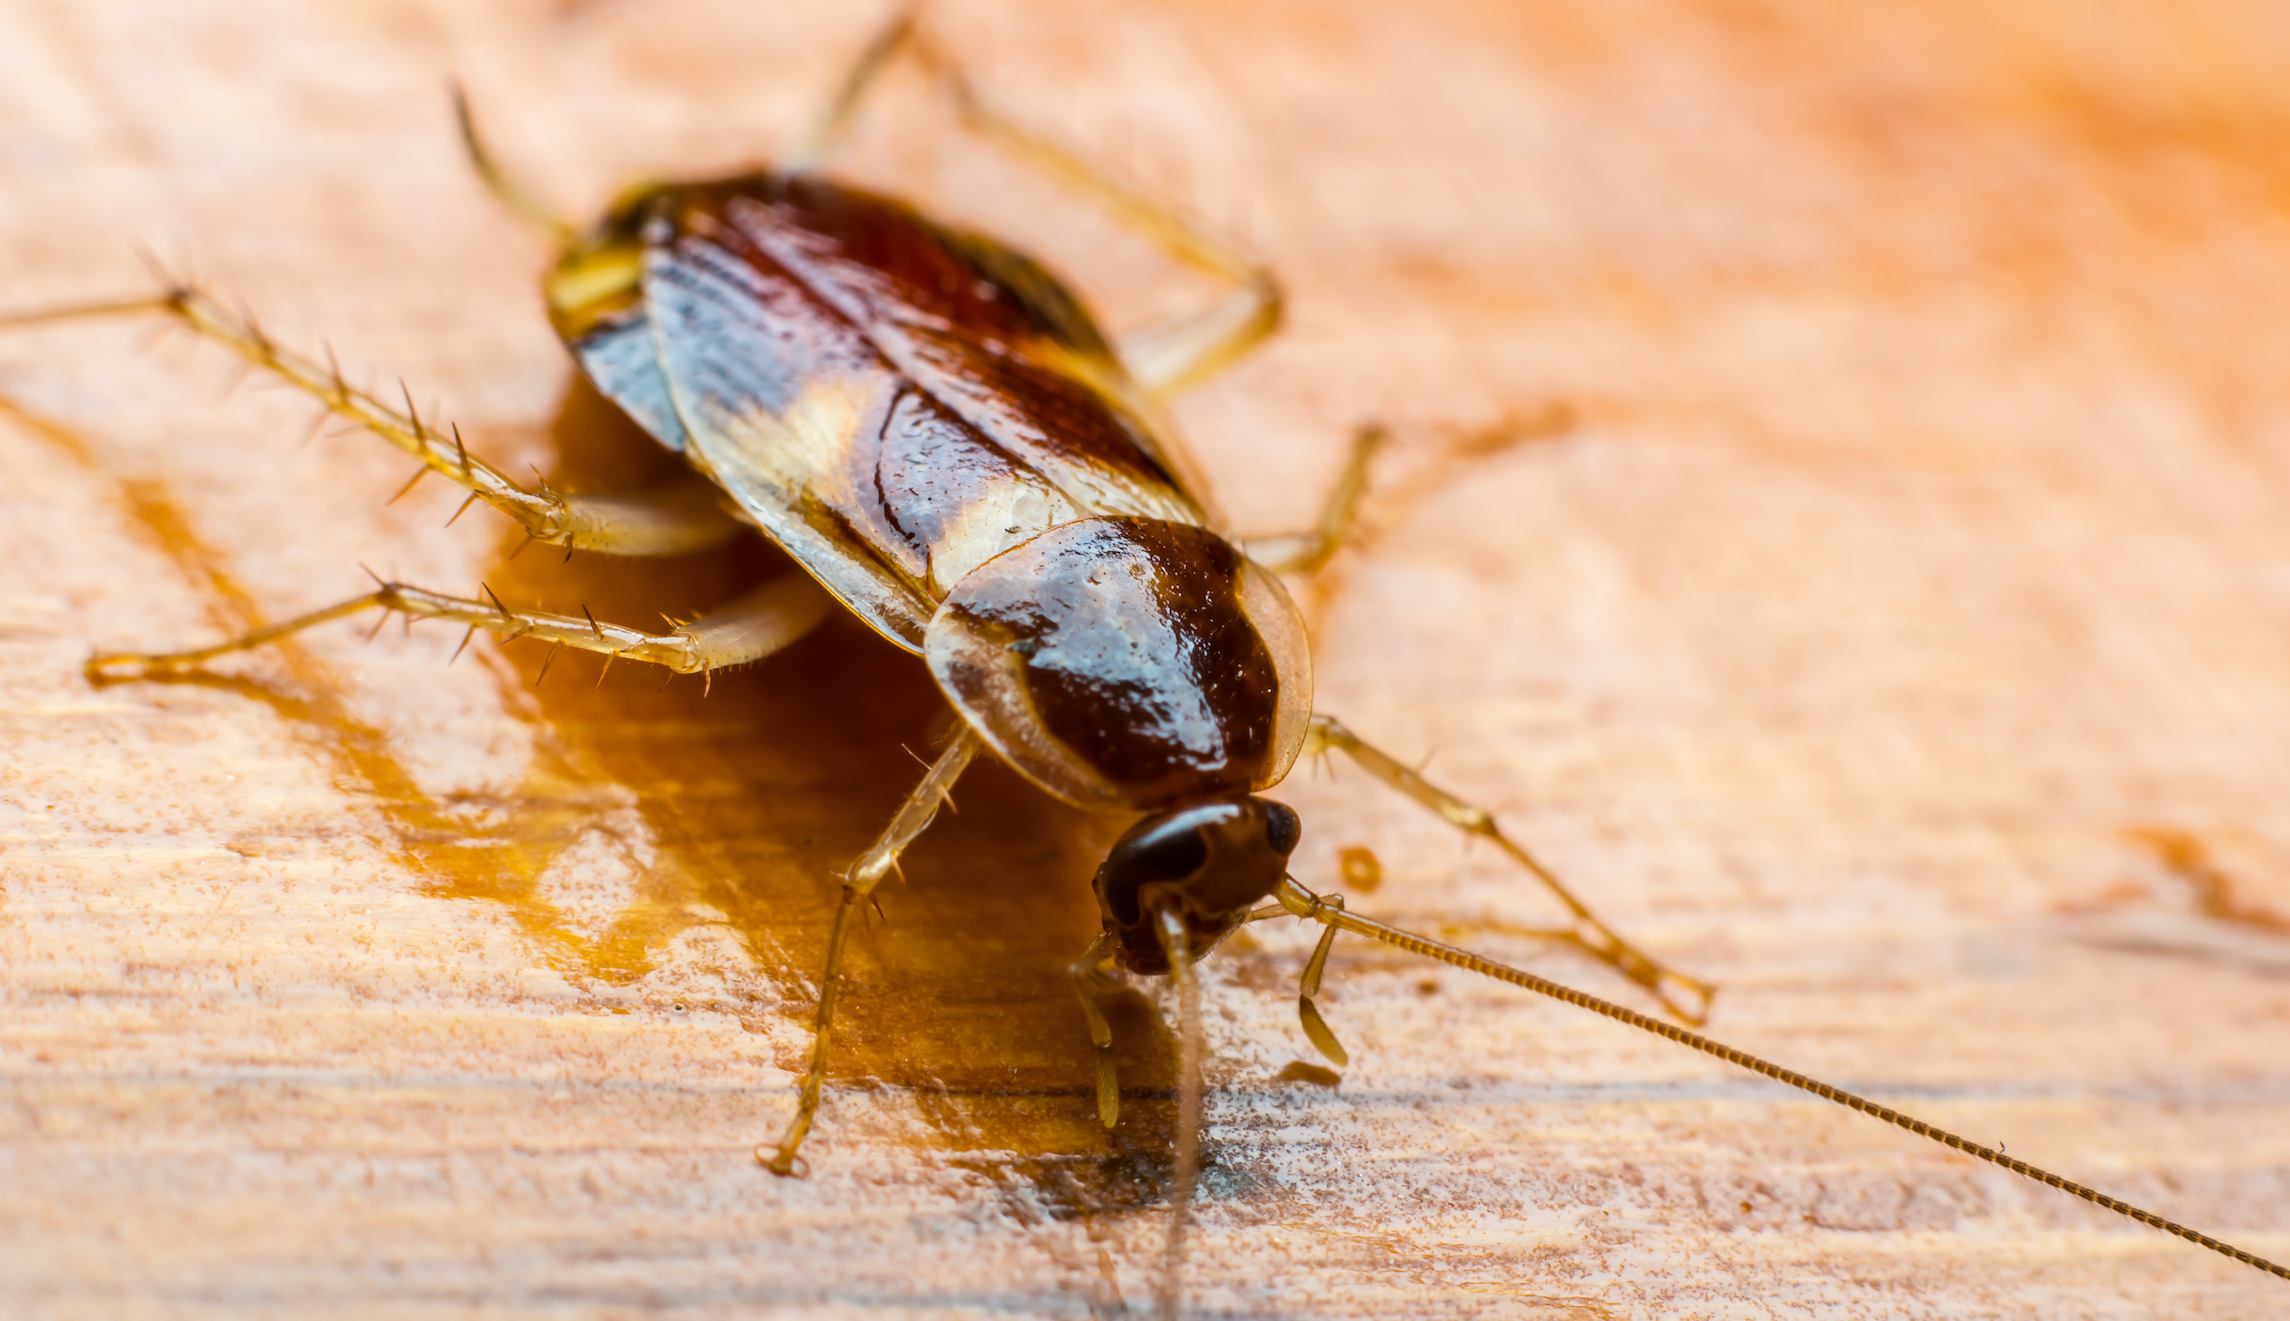 Pest Control Company Offering 2000 To Release 100 Cockroaches In Your Home Washington Examiner